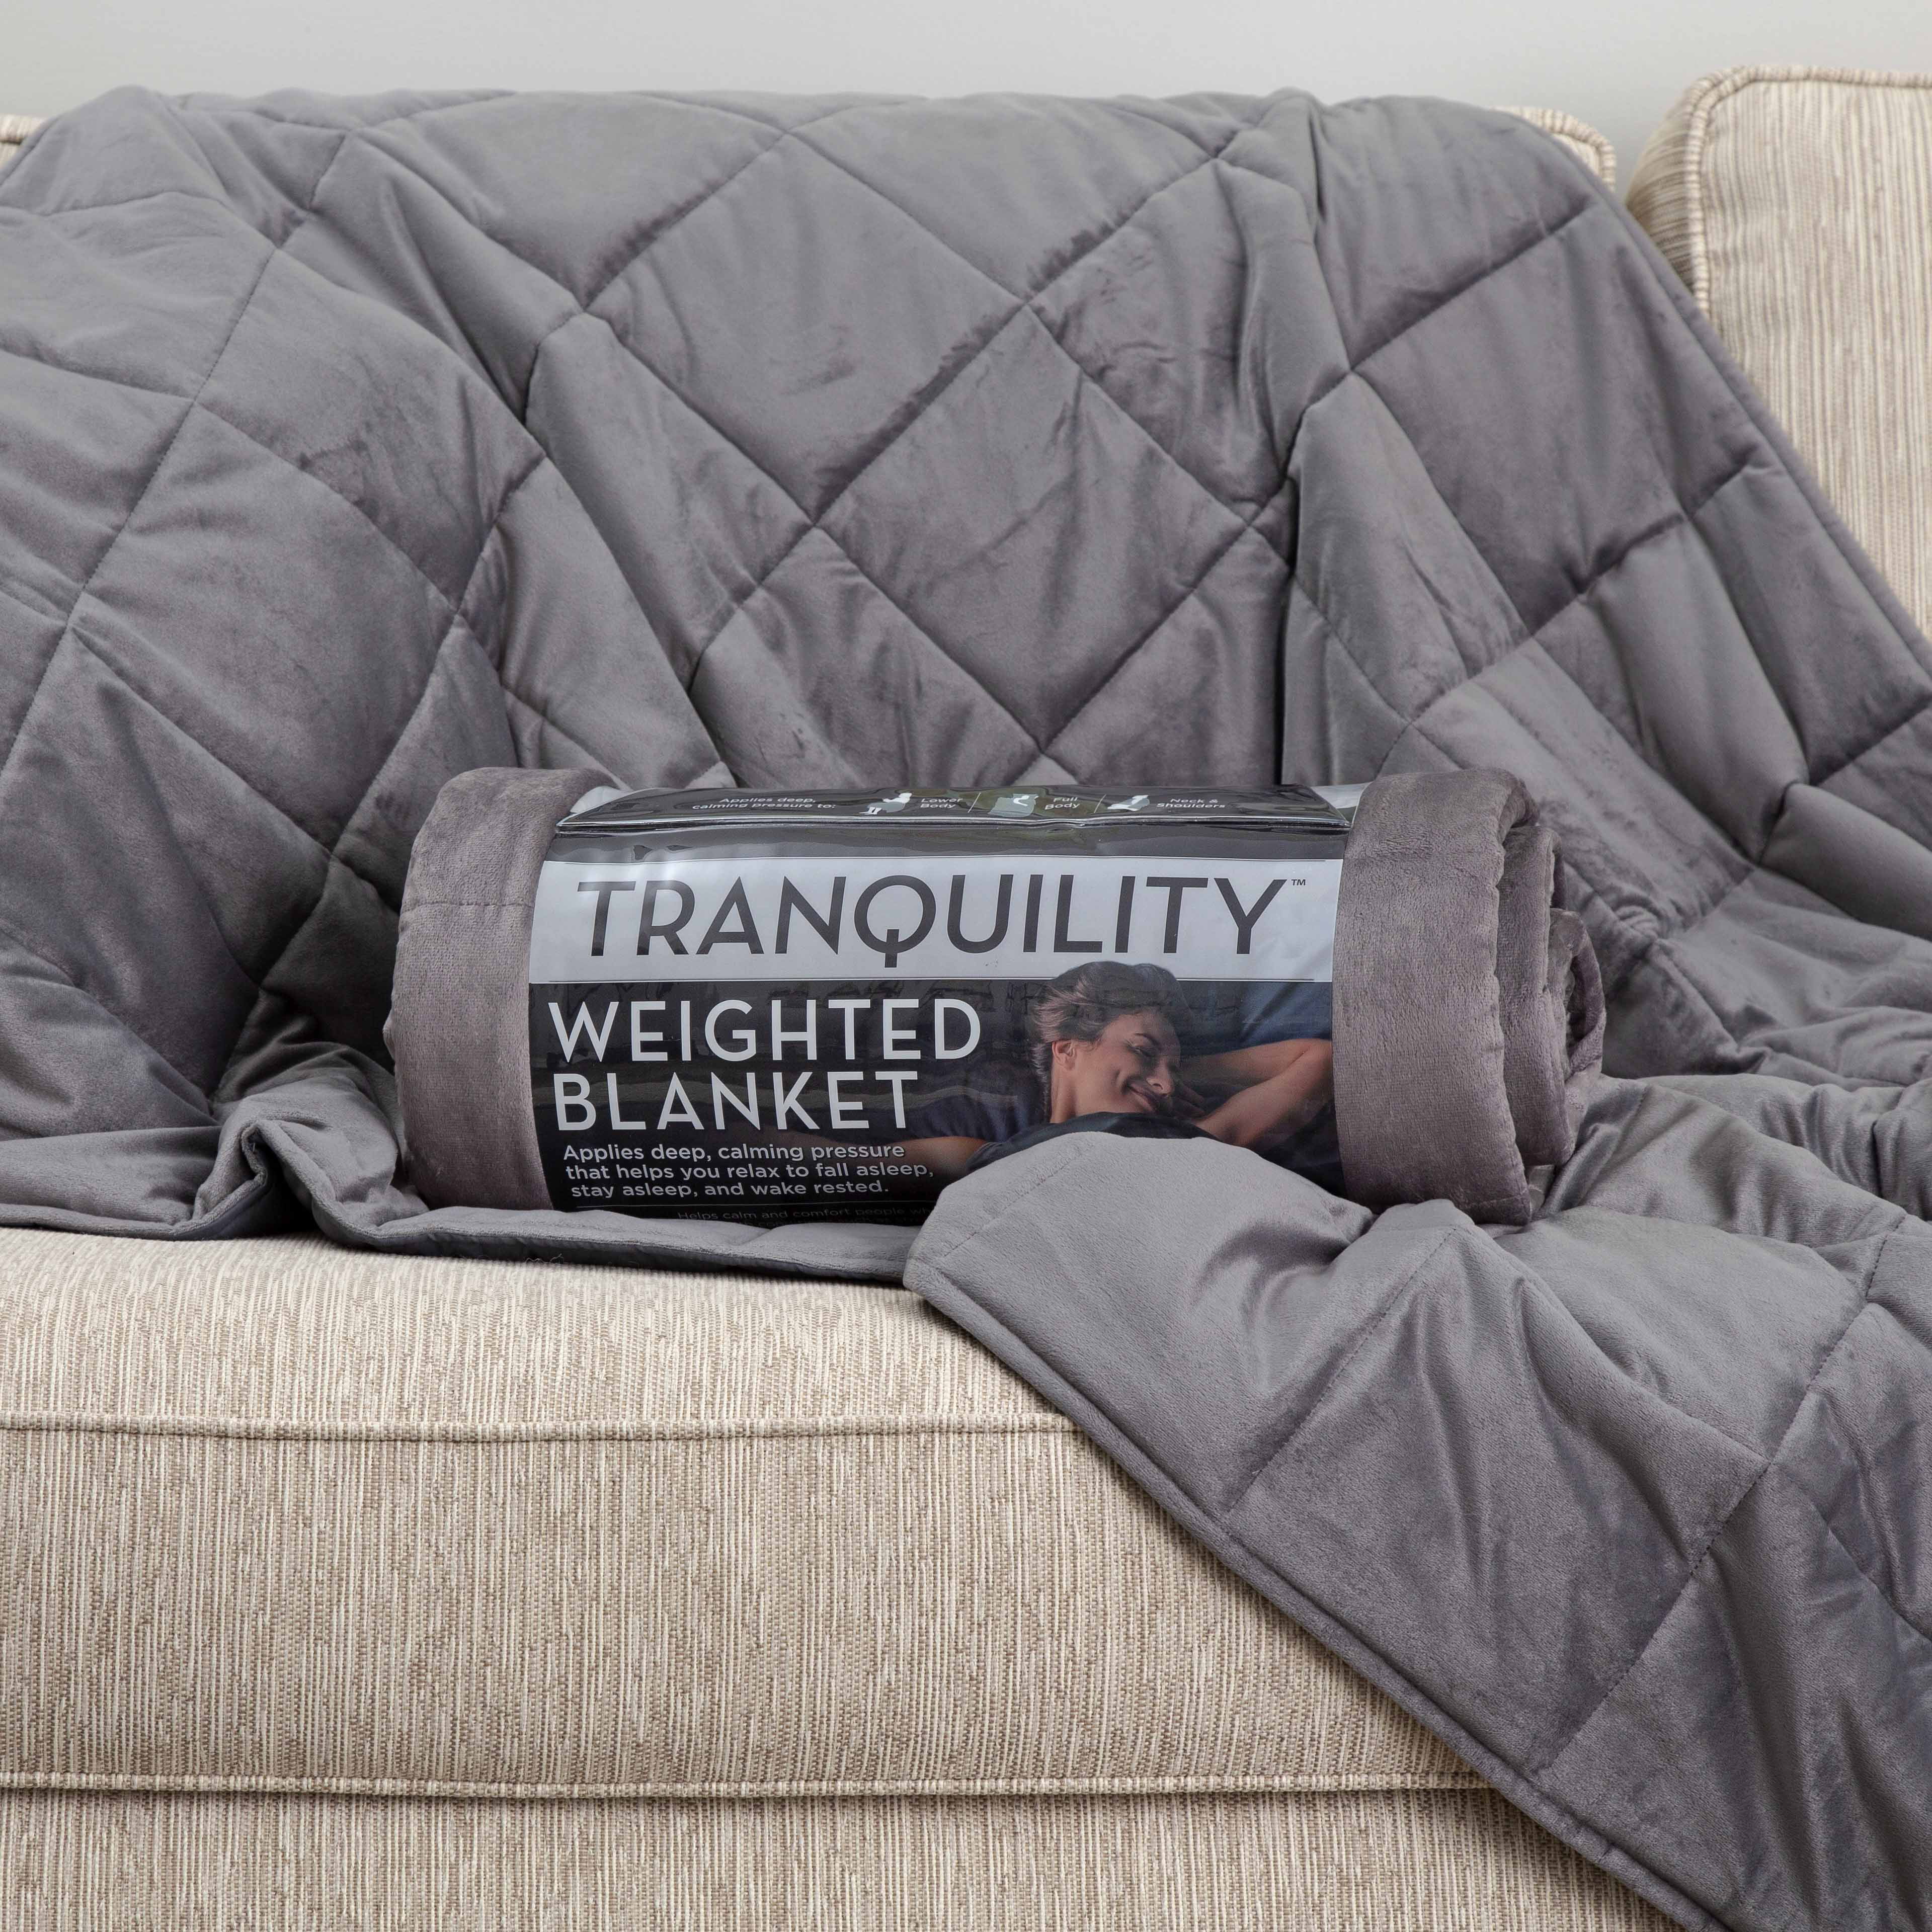 Electric Blanket Prices At Walmart | See More...